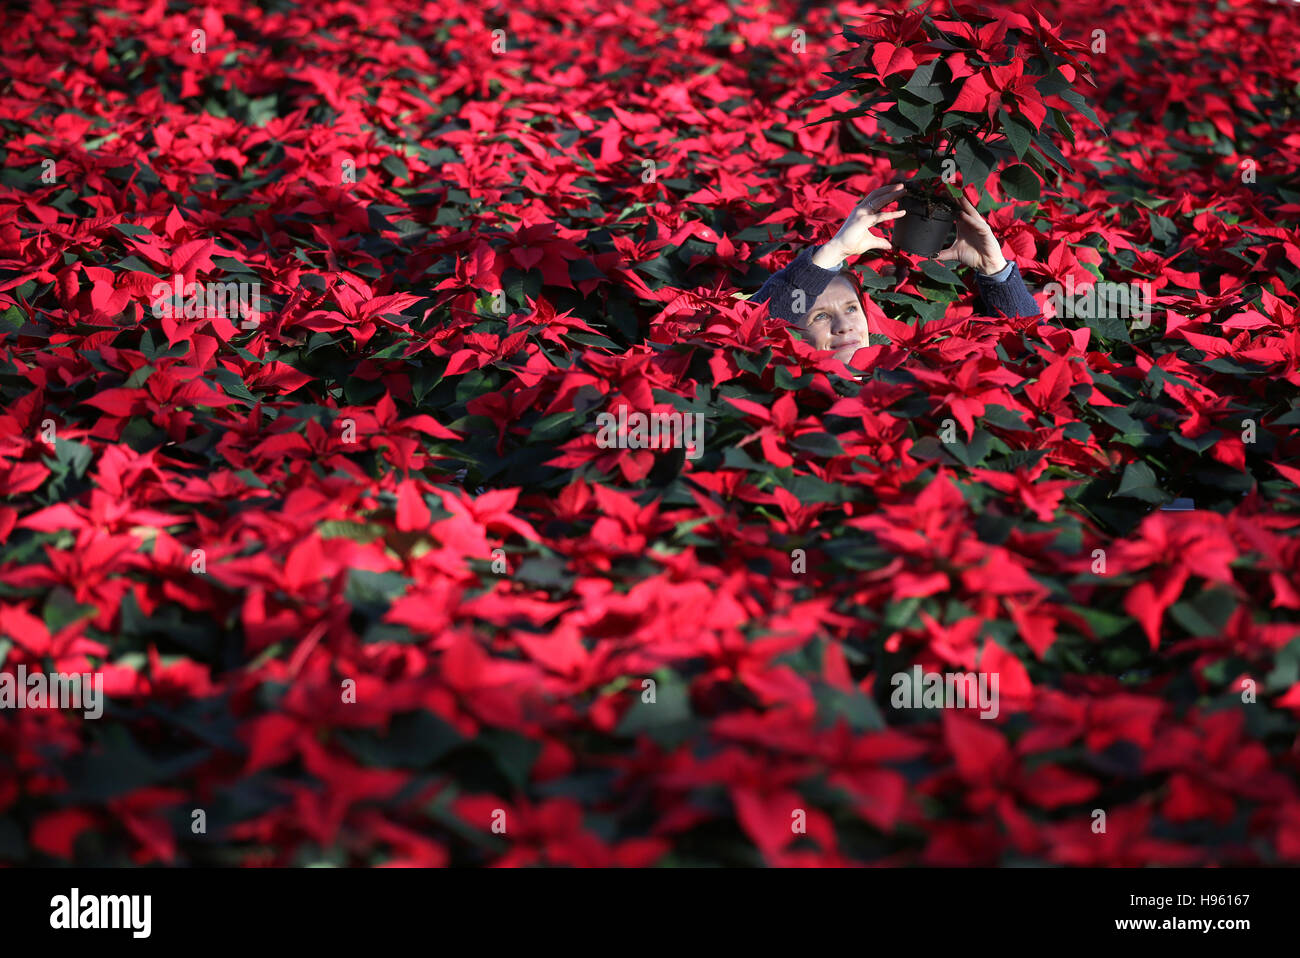 Edite Gailite, an employee at the Pentland Plants garden centre in Loanhead, Midlothian, prepares Poinsettia plants ready to be dispatched for the Christmas season. Stock Photo